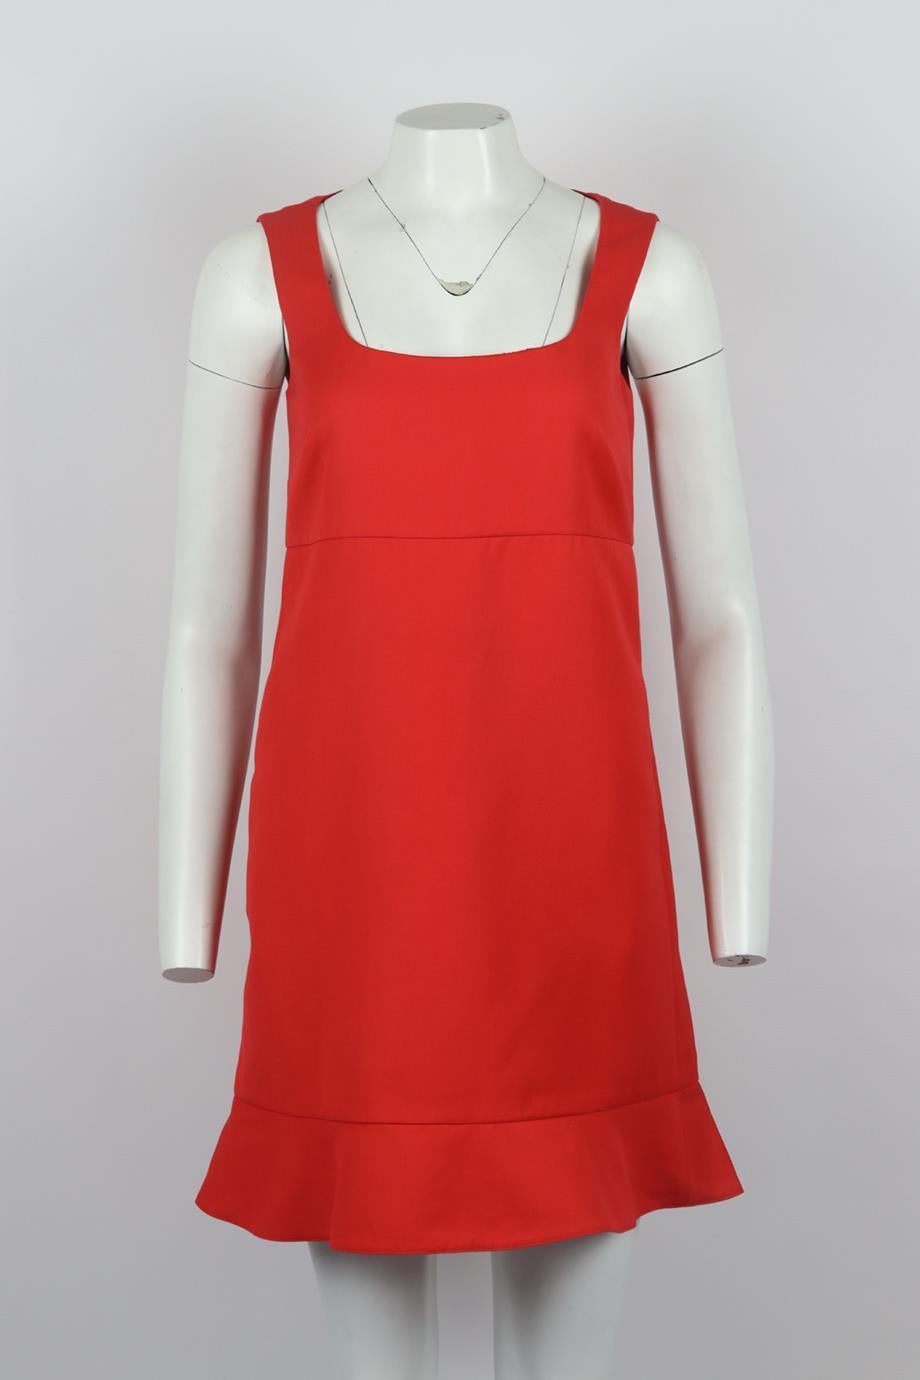 RED Valentino ruffled cotton blend mini dress. Red. Sleeveless, scoop neck. Zip fastening at back. 56% Cotton, 44% viscose; lining: 67% acetate, 33% polyester. Size: IT 42 (UK 10, US 6, FR 38). Bust: 32.8 in. Waist: 32 in. Hips: 38 in. Length: 33.6